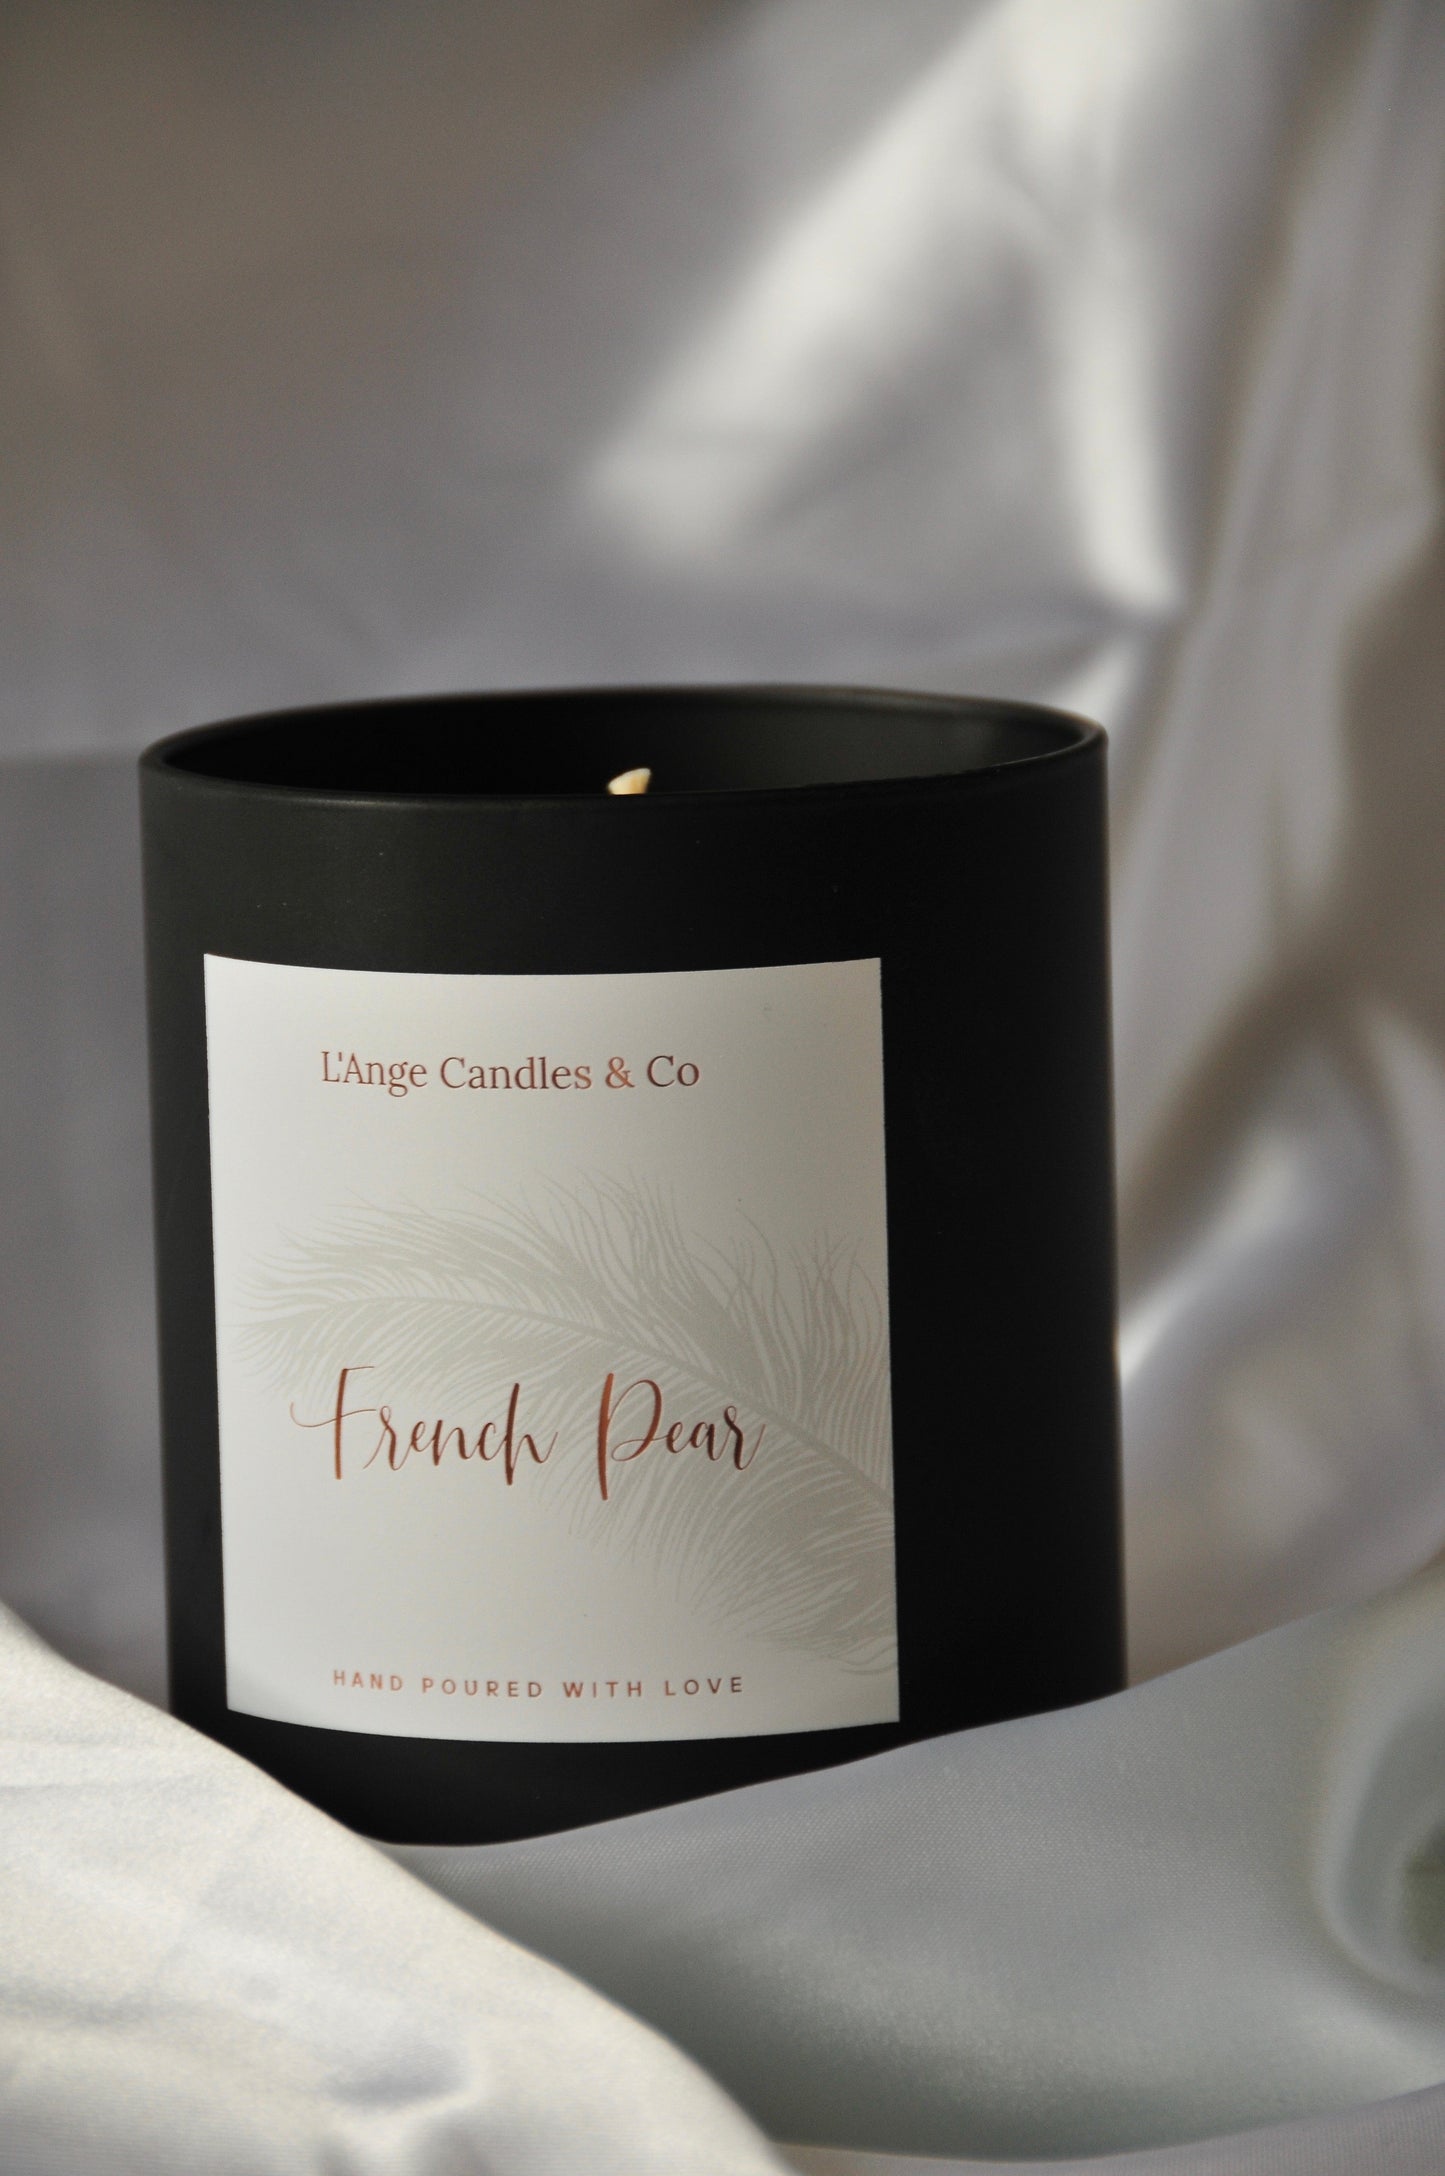 COCONUT & LIME DELUXE CANDLE